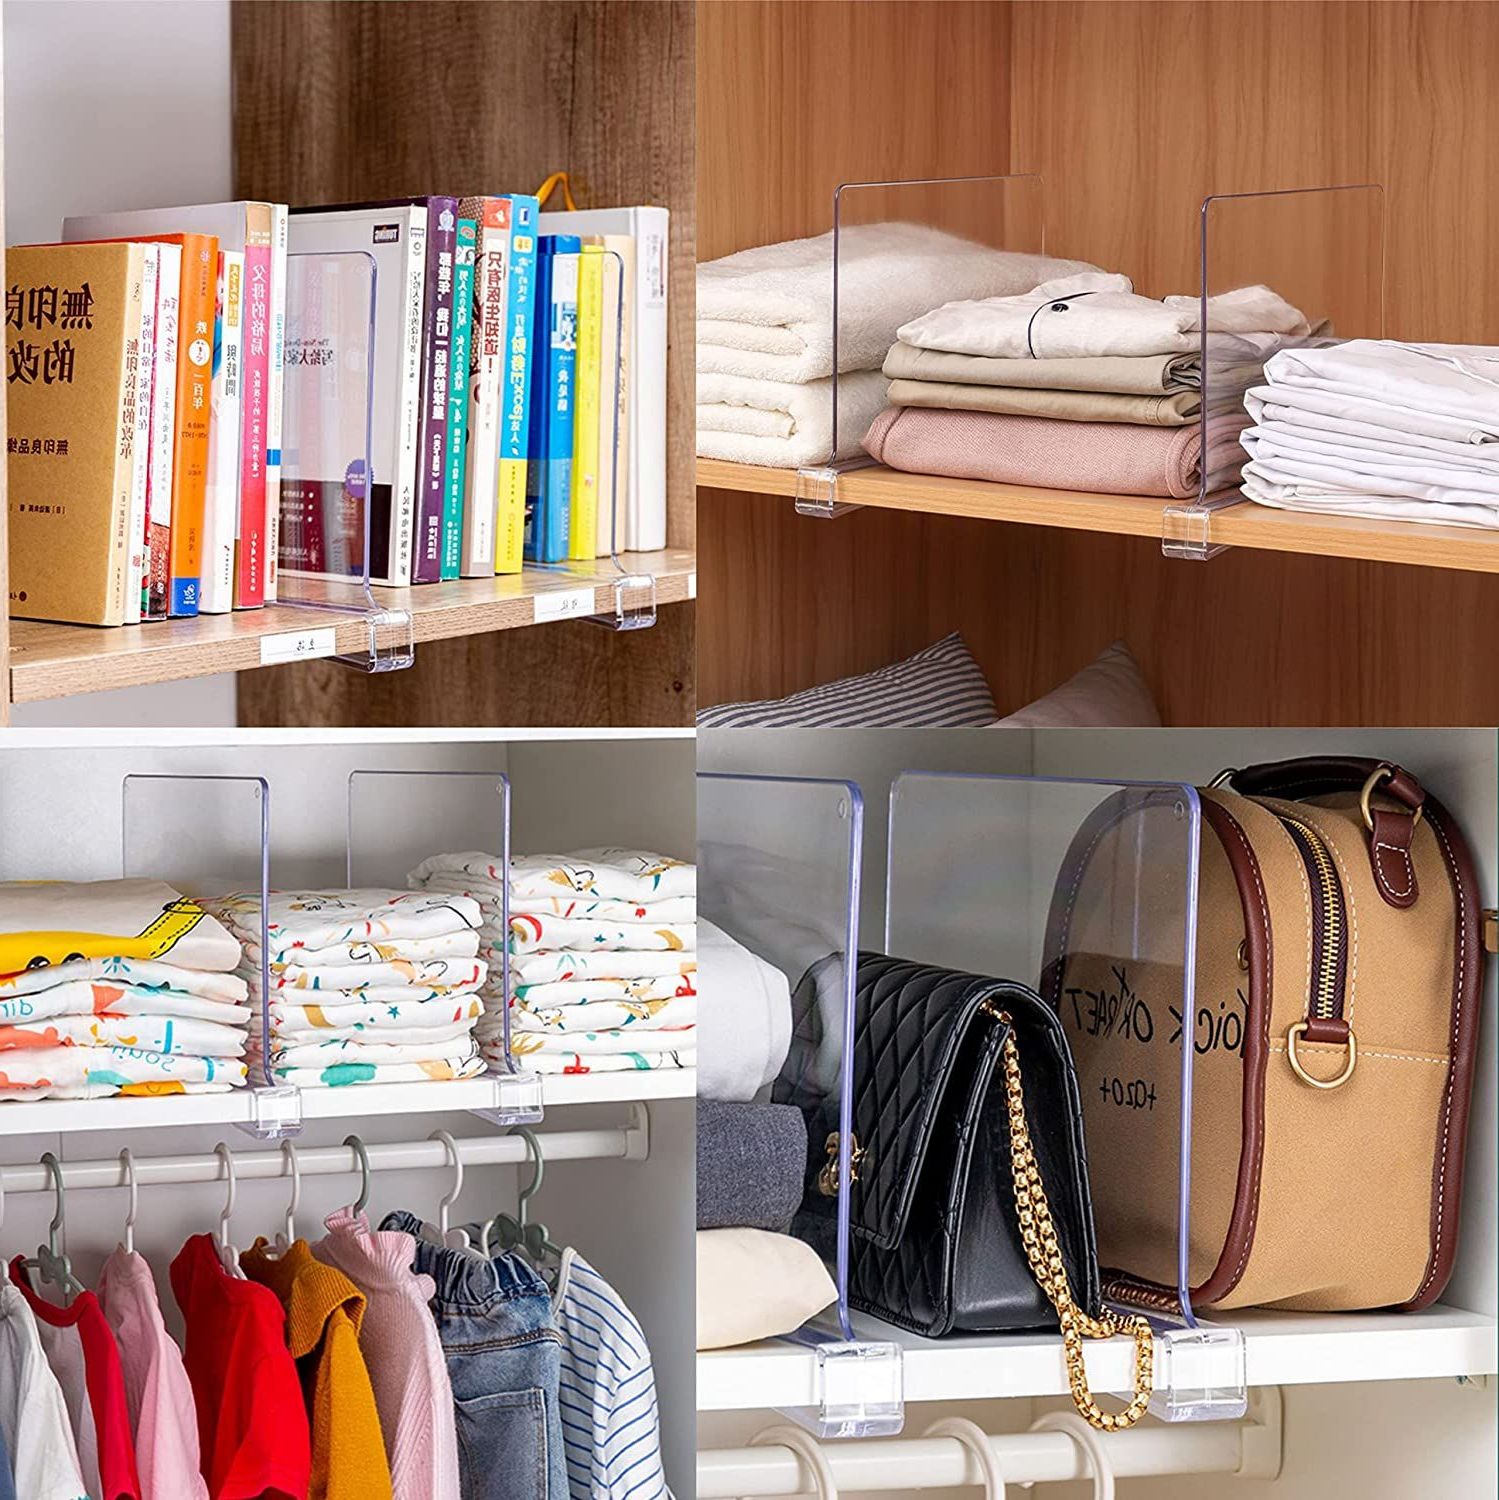 35 Best Closet Organization Ideas To Maximize Space Throughout Clothes Organizer Wardrobes (Gallery 2 of 20)